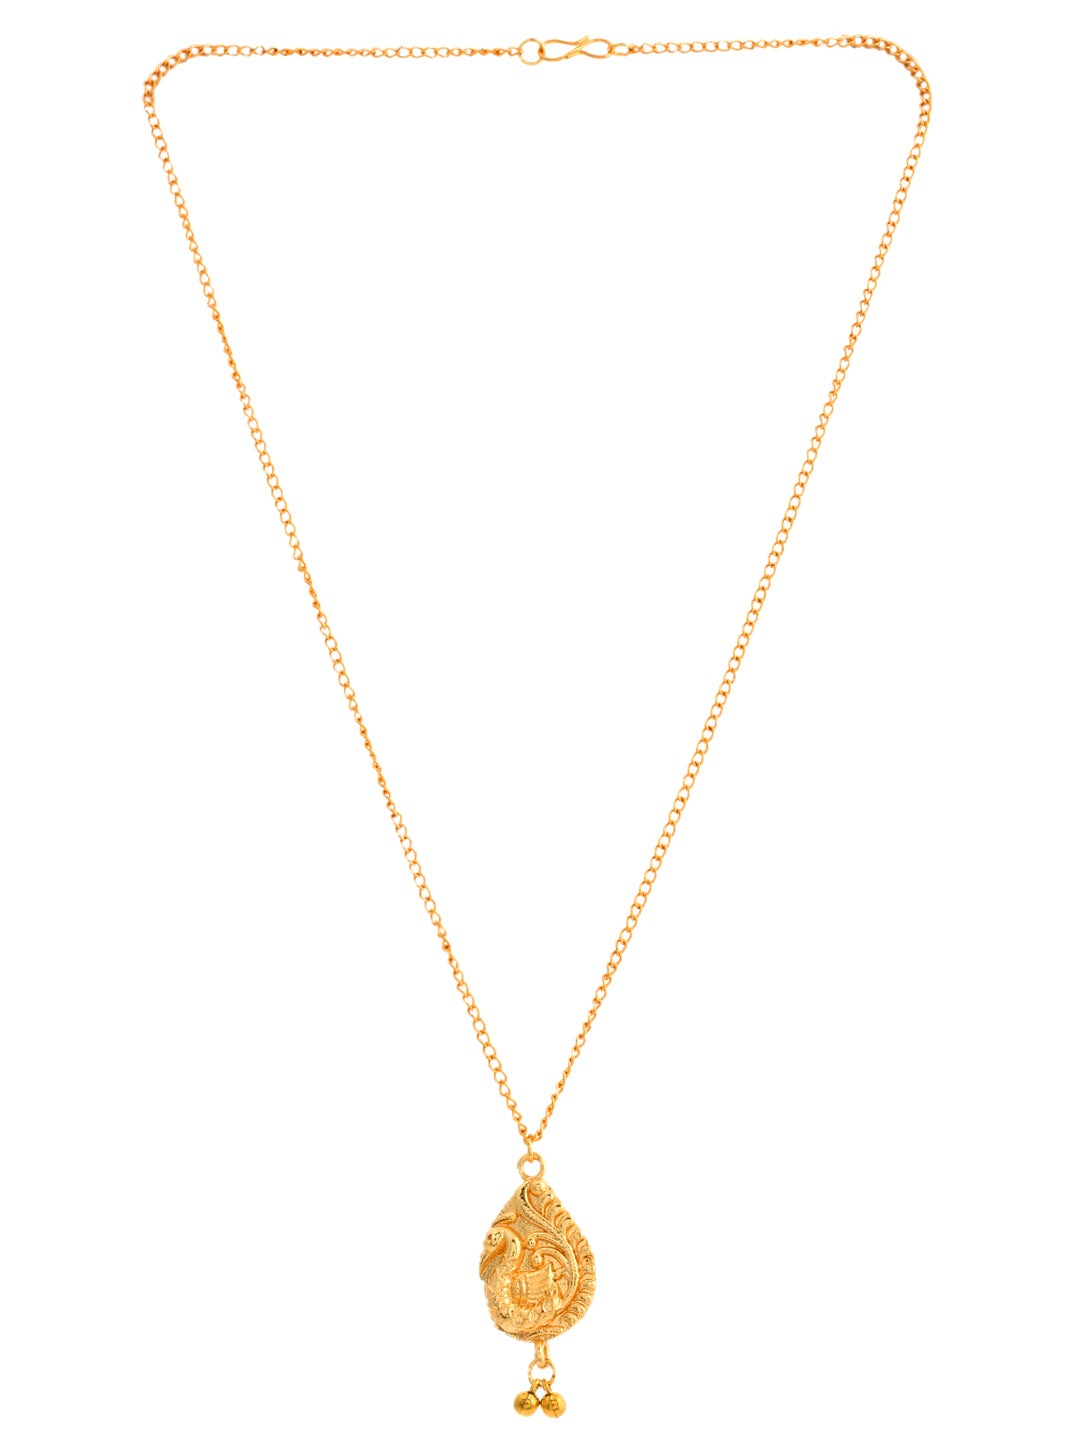 Handcrafted Gold Plated Pendant Chain